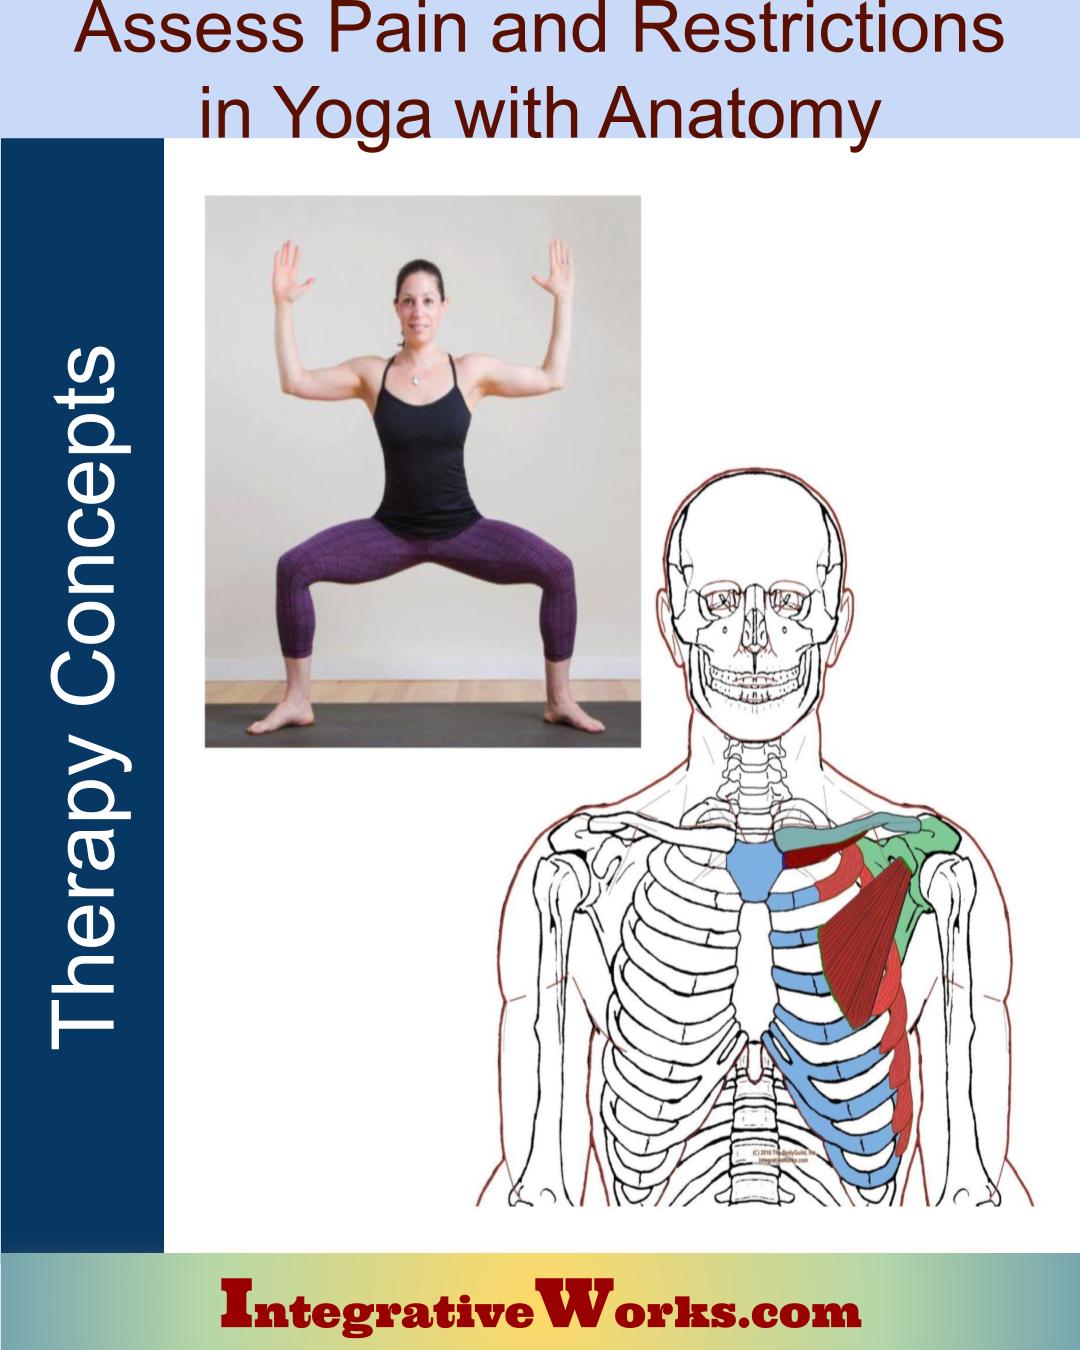 Assess Pain and Restriction in Yoga with Anatomy